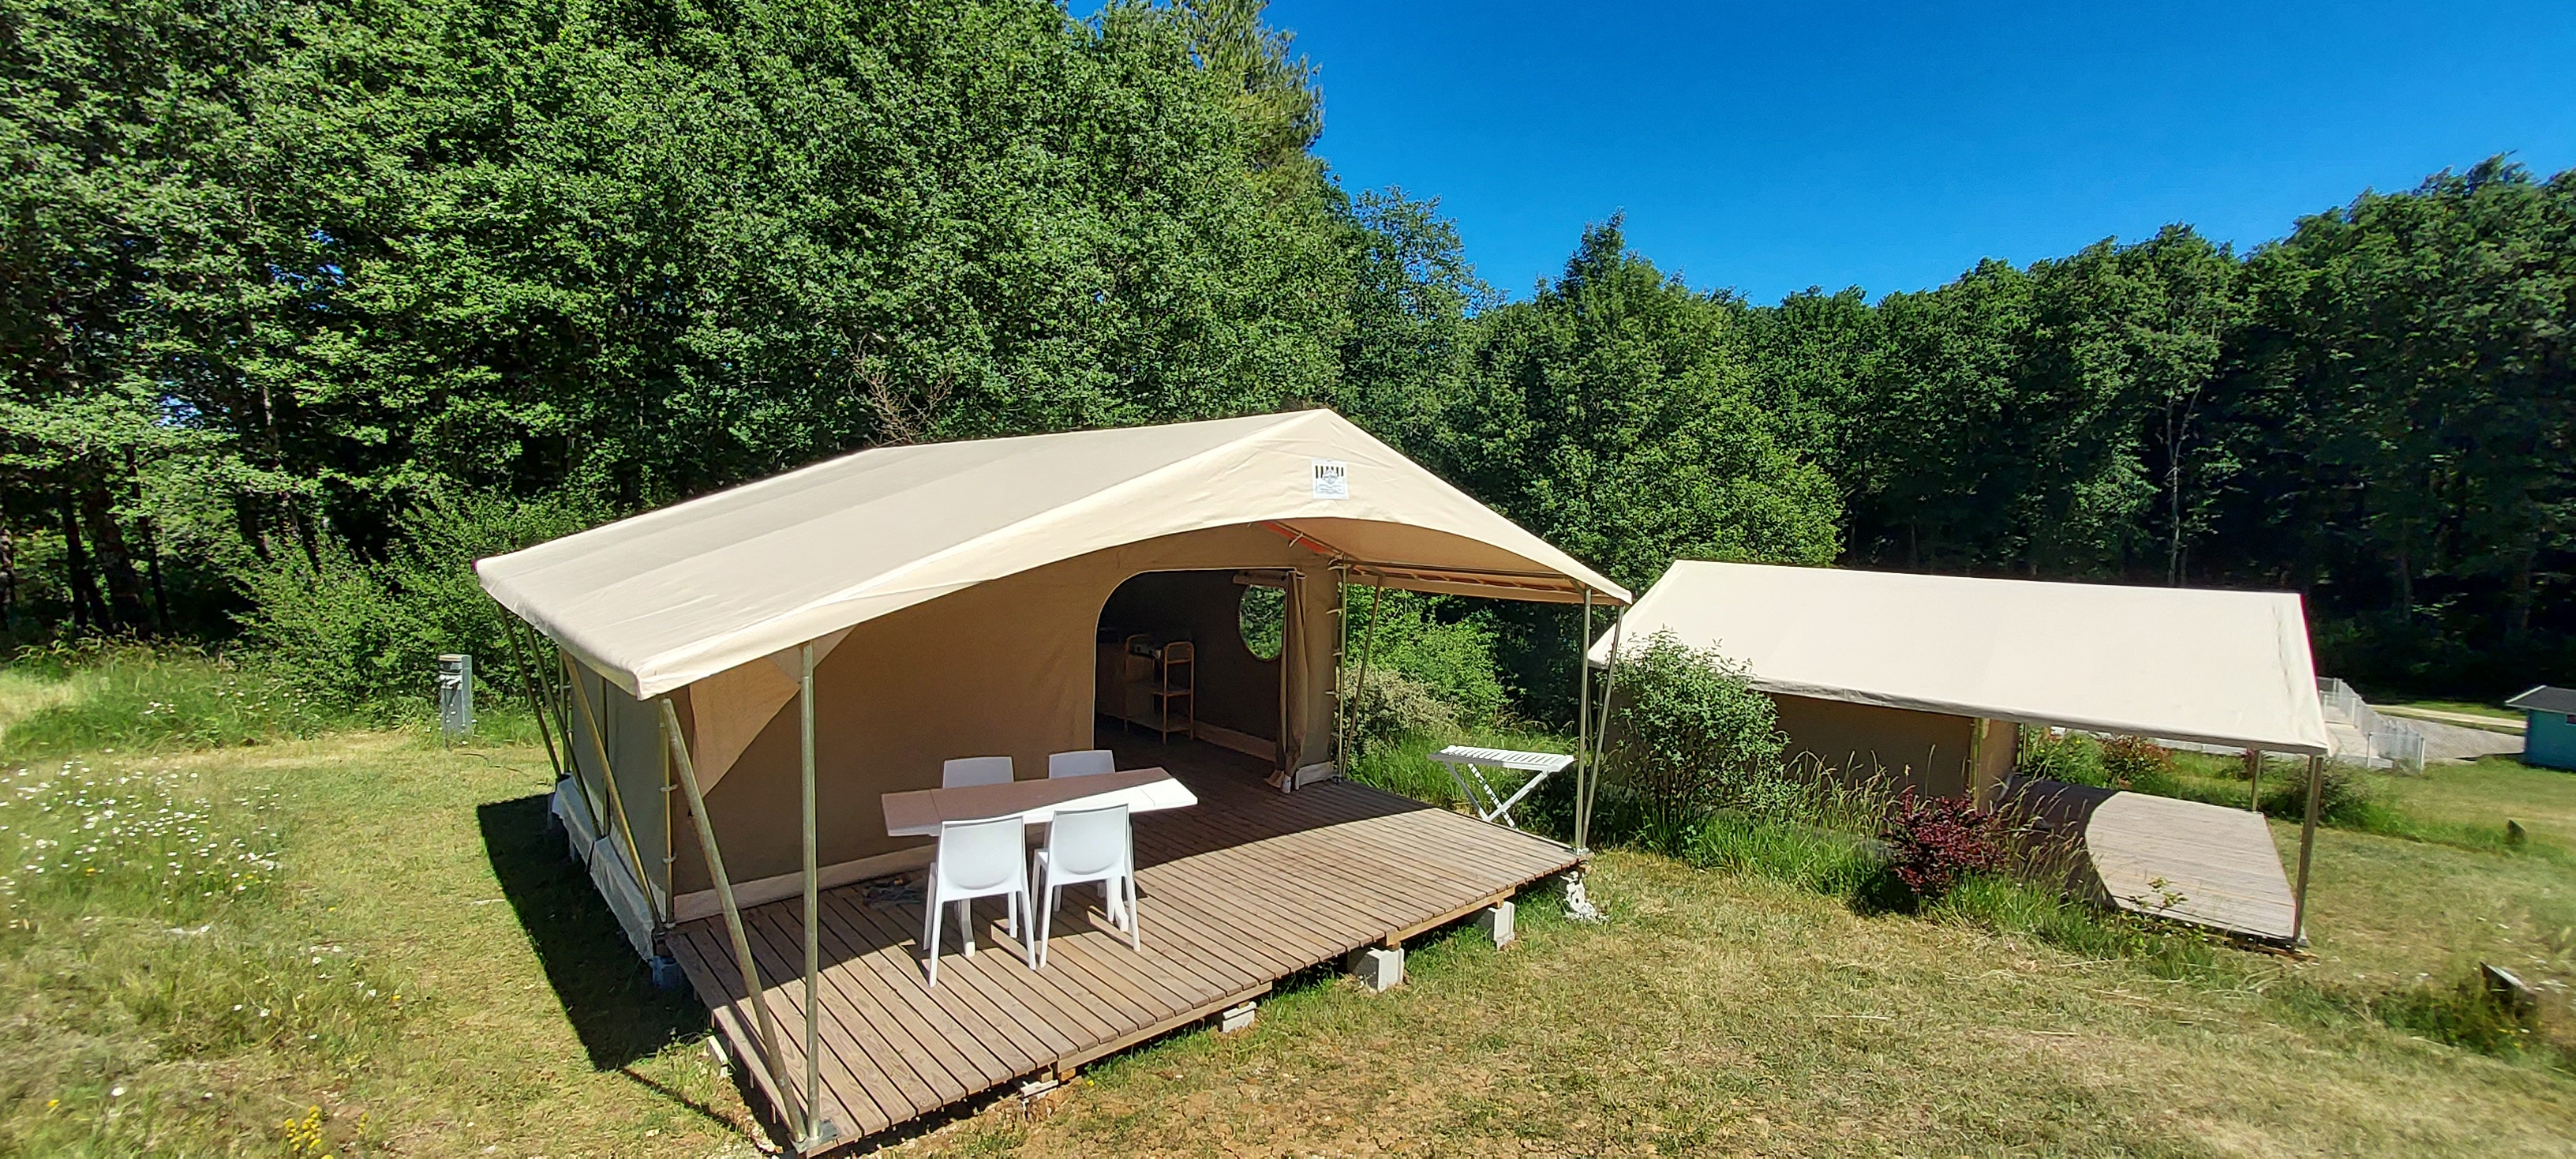 Tente Lodge Glamping et Nature